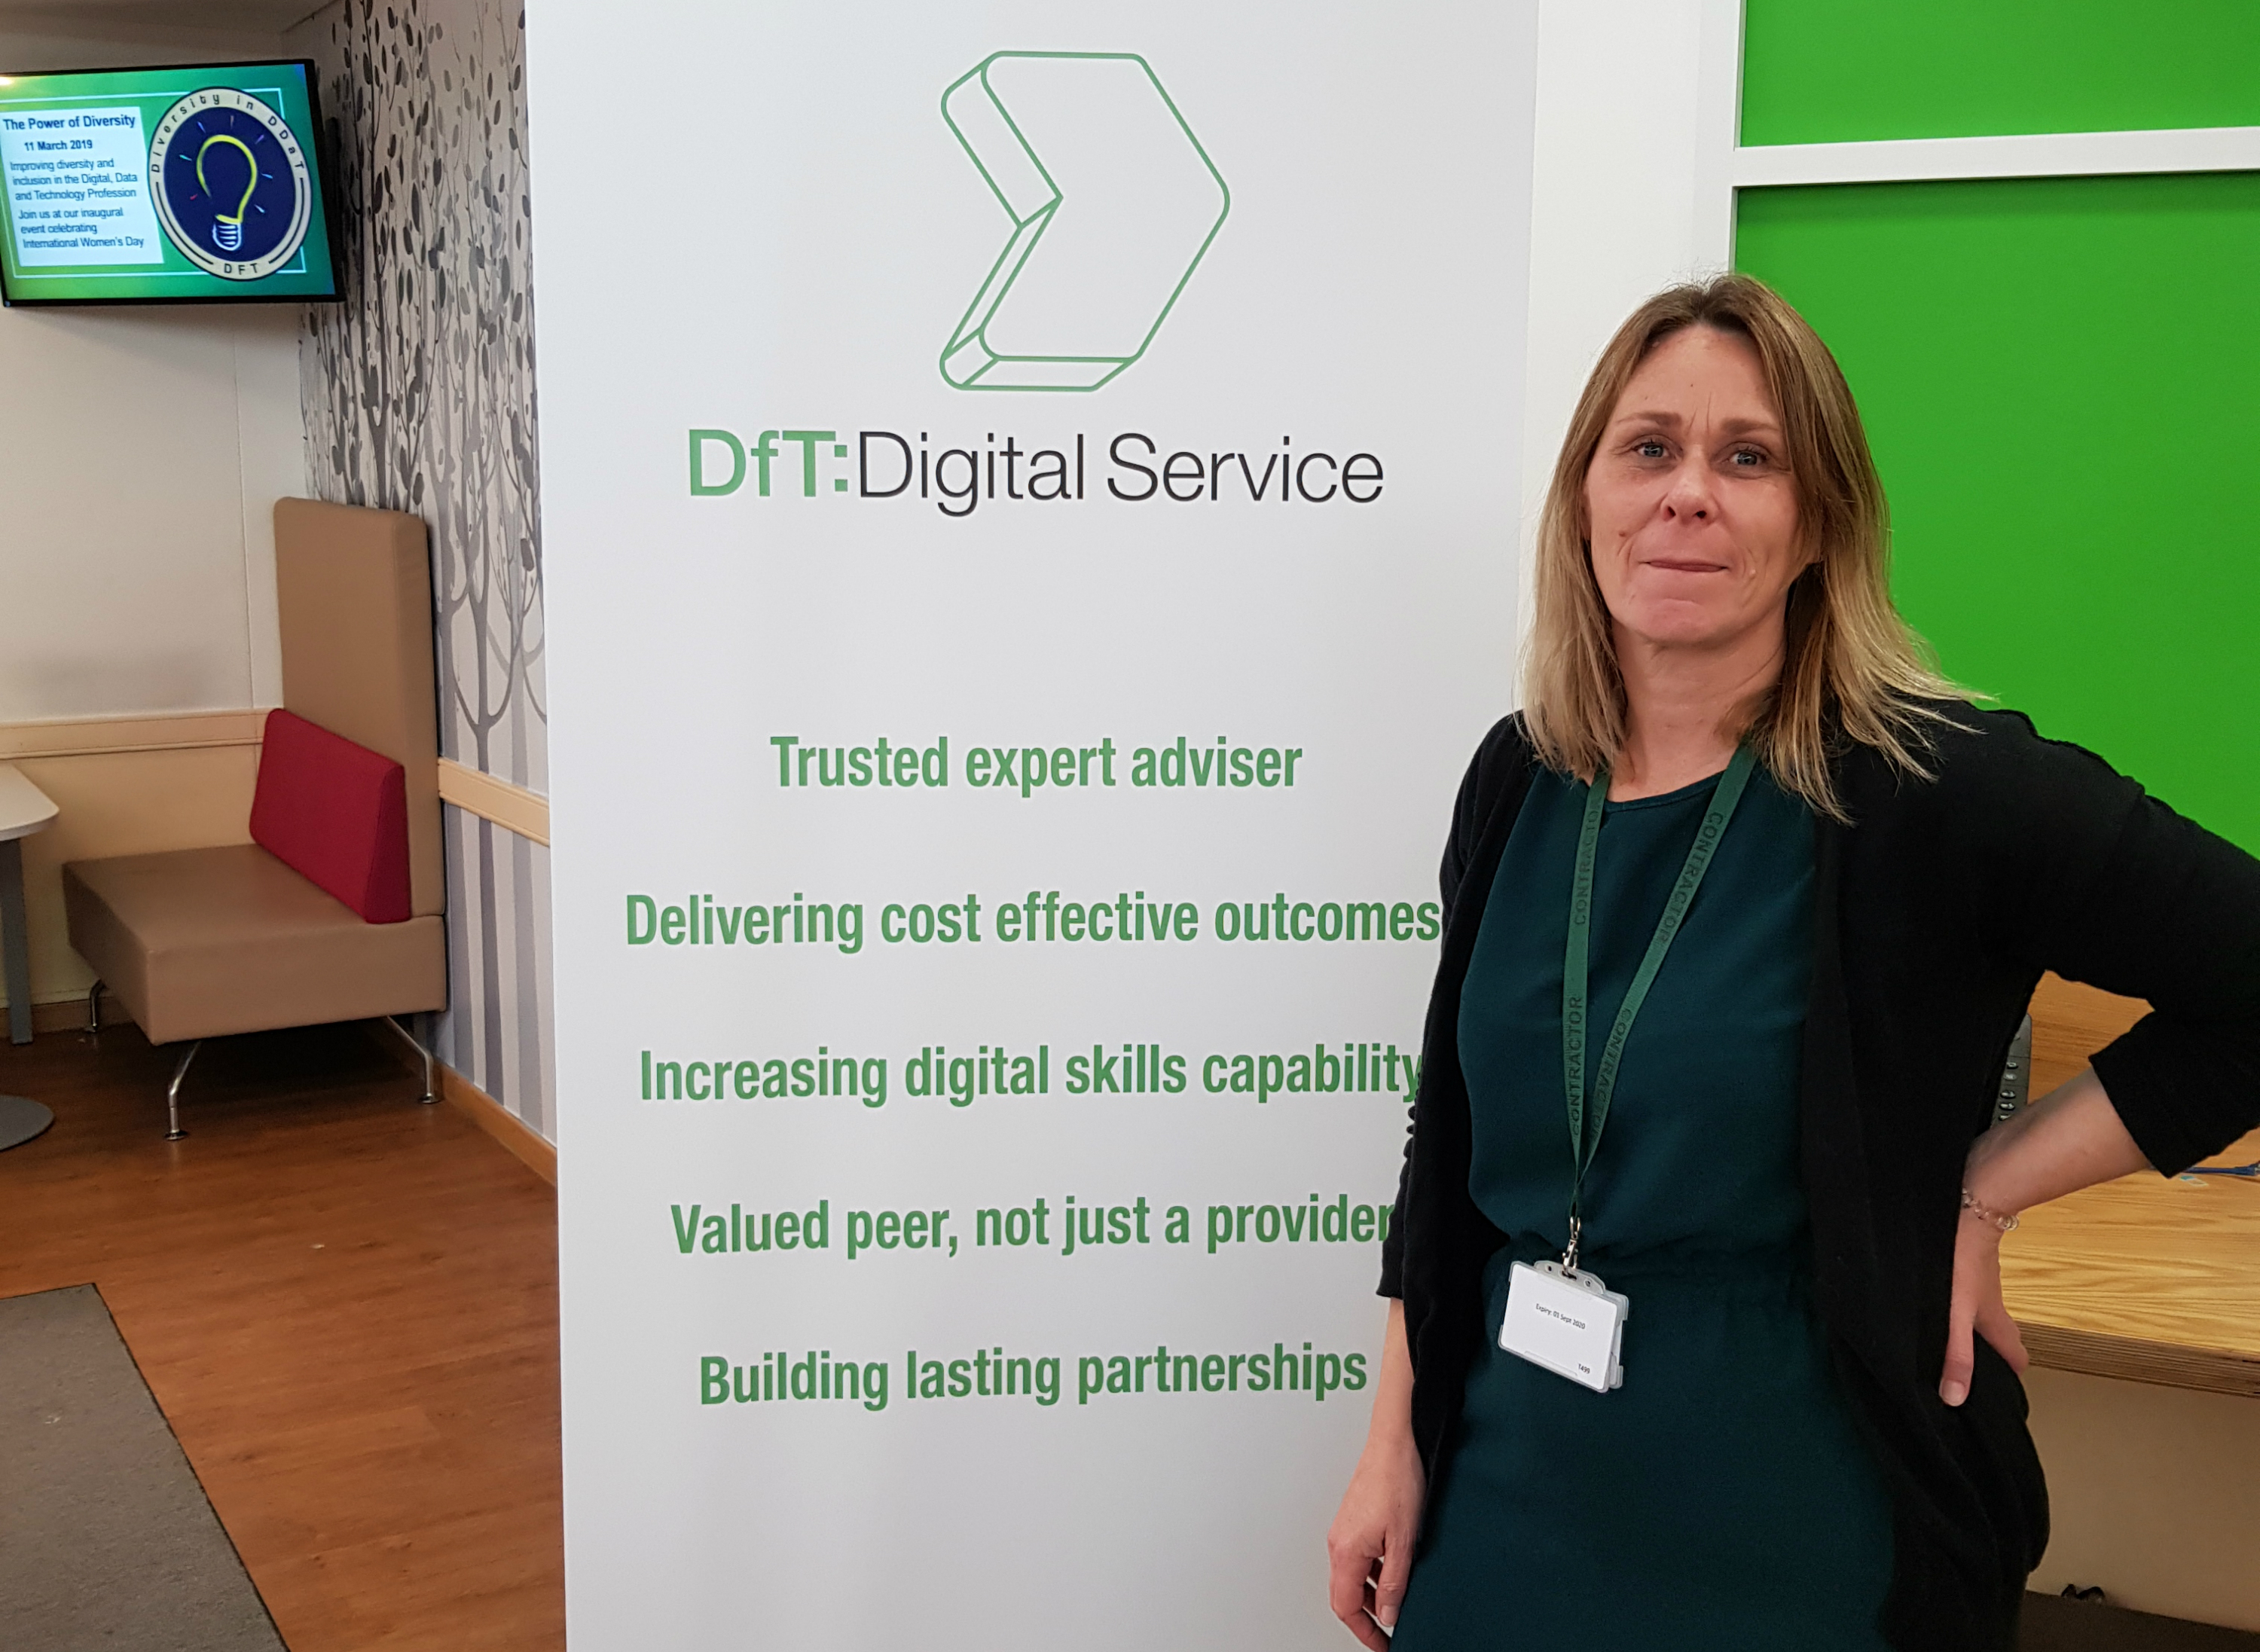 Vanessa Hughes, alongside a banner that says DfT Digital Service. Trusted expert adviser. Delivering cost effective outcomes. Increasing digital skills capability. Valued peer, not just a provider. Building lasting partnerships. In the background, a video display advertises an International Women's Day event.